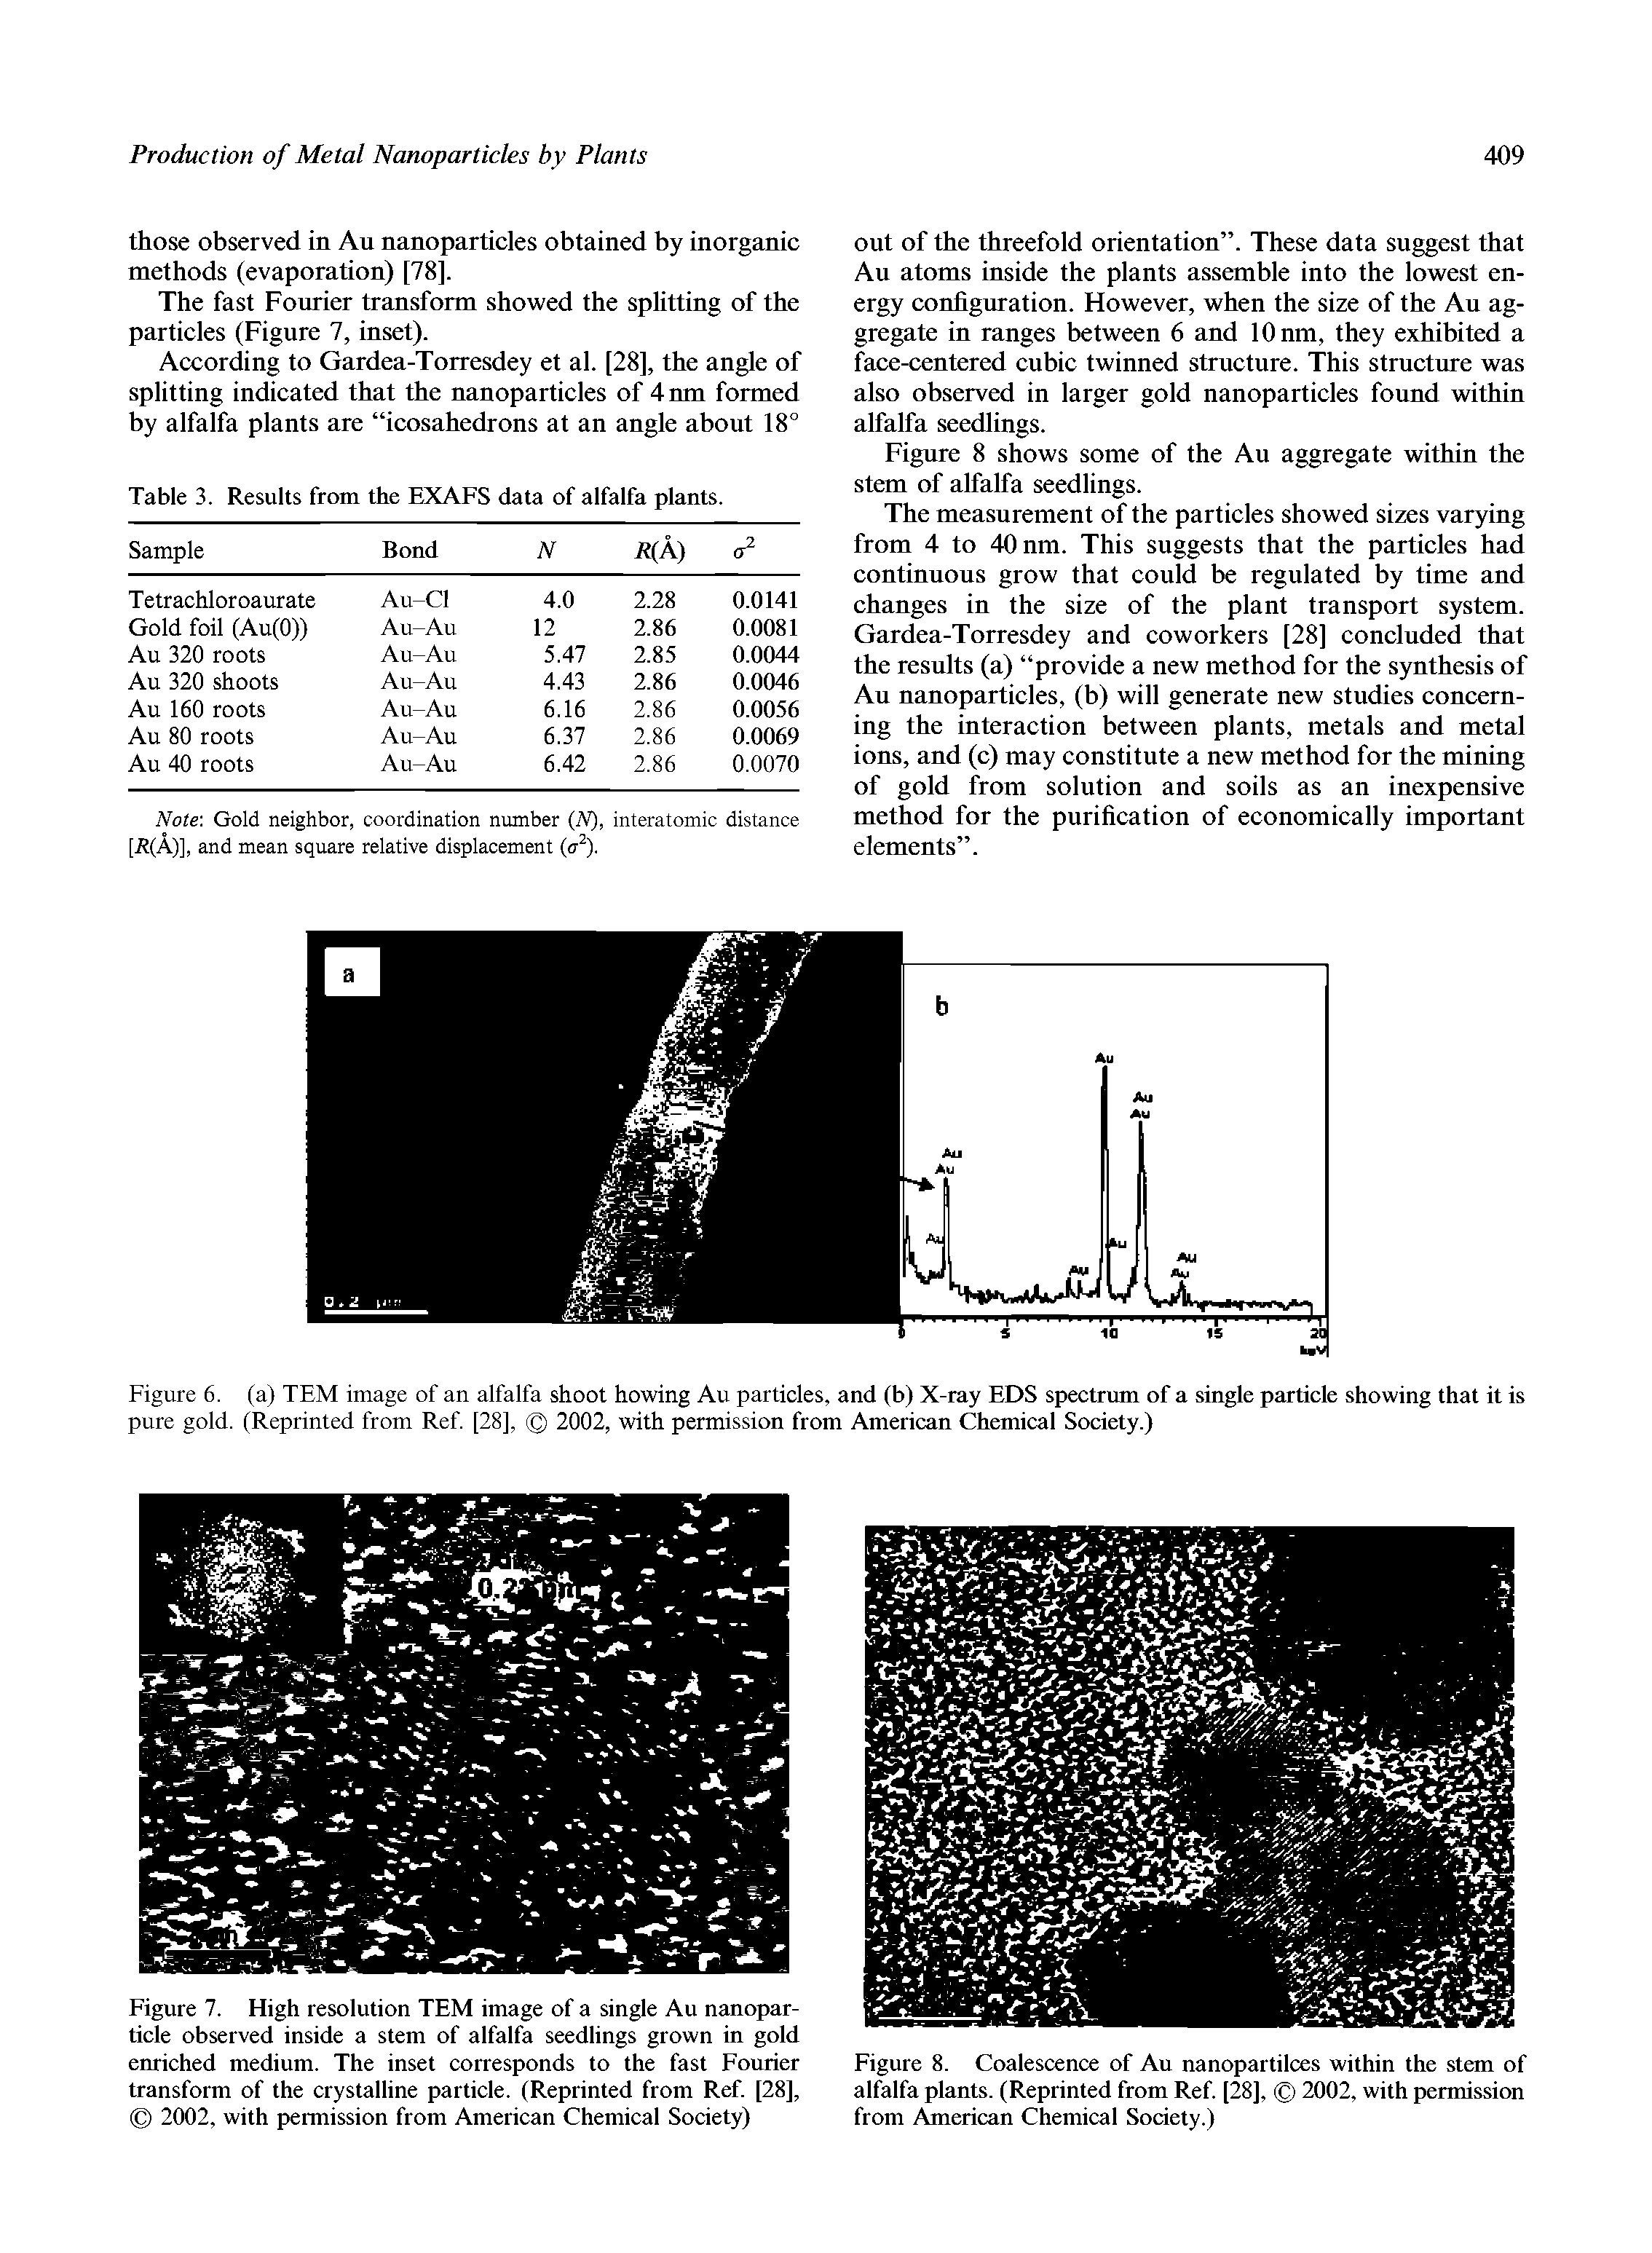 Figure 7. High resolution TEM image of a single Au nanoparticle observed inside a stem of alfalfa seedlings grown in gold emiched medium. The inset corresponds to the fast Fourier transform of the crystalline particle. (Reprinted from Ref. [28], 2002, with permission from American Chemical Society)...